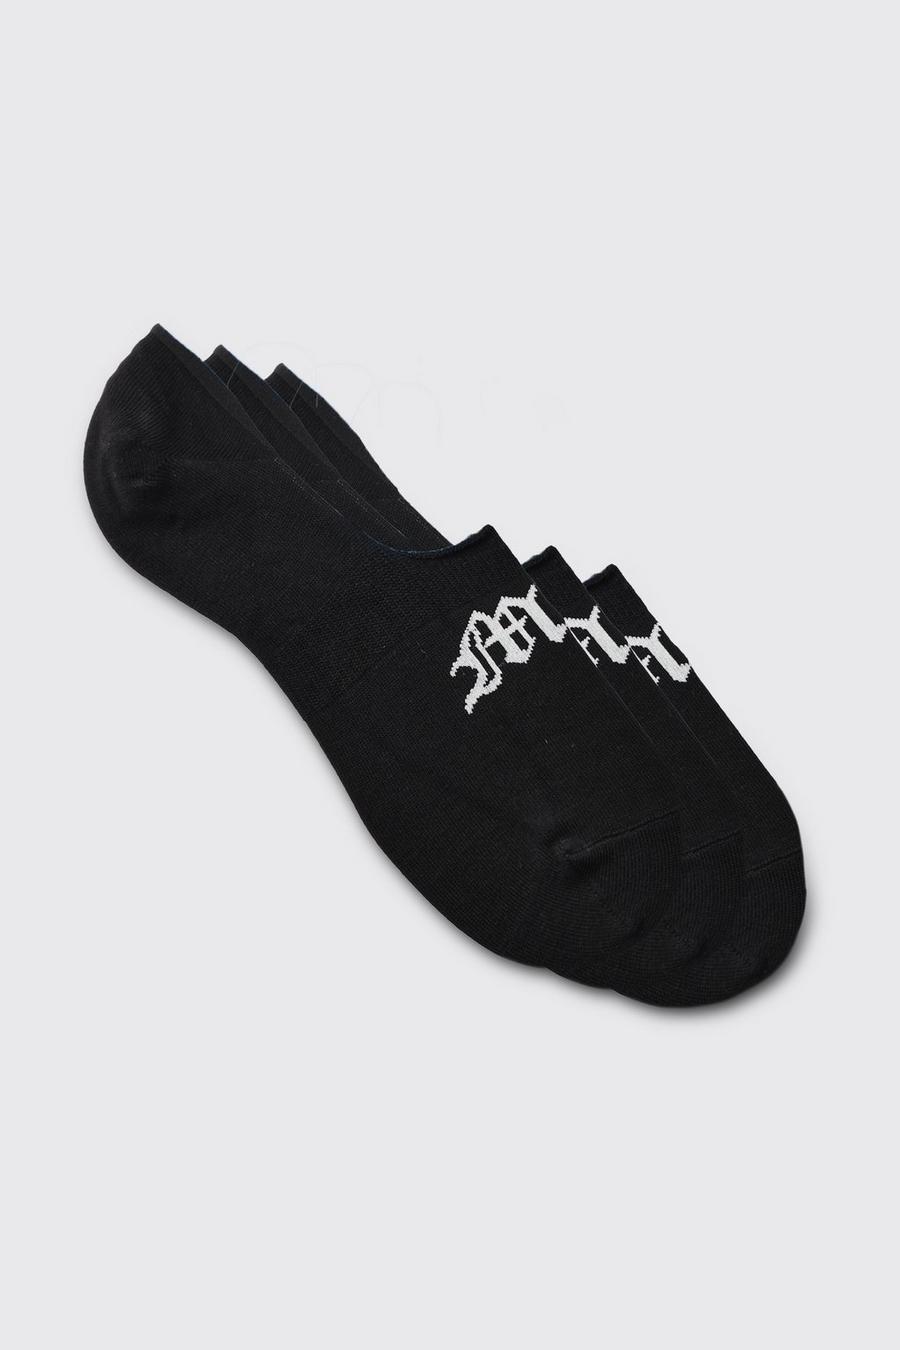 Black 3 Pack Gothic Man Invisible Socks